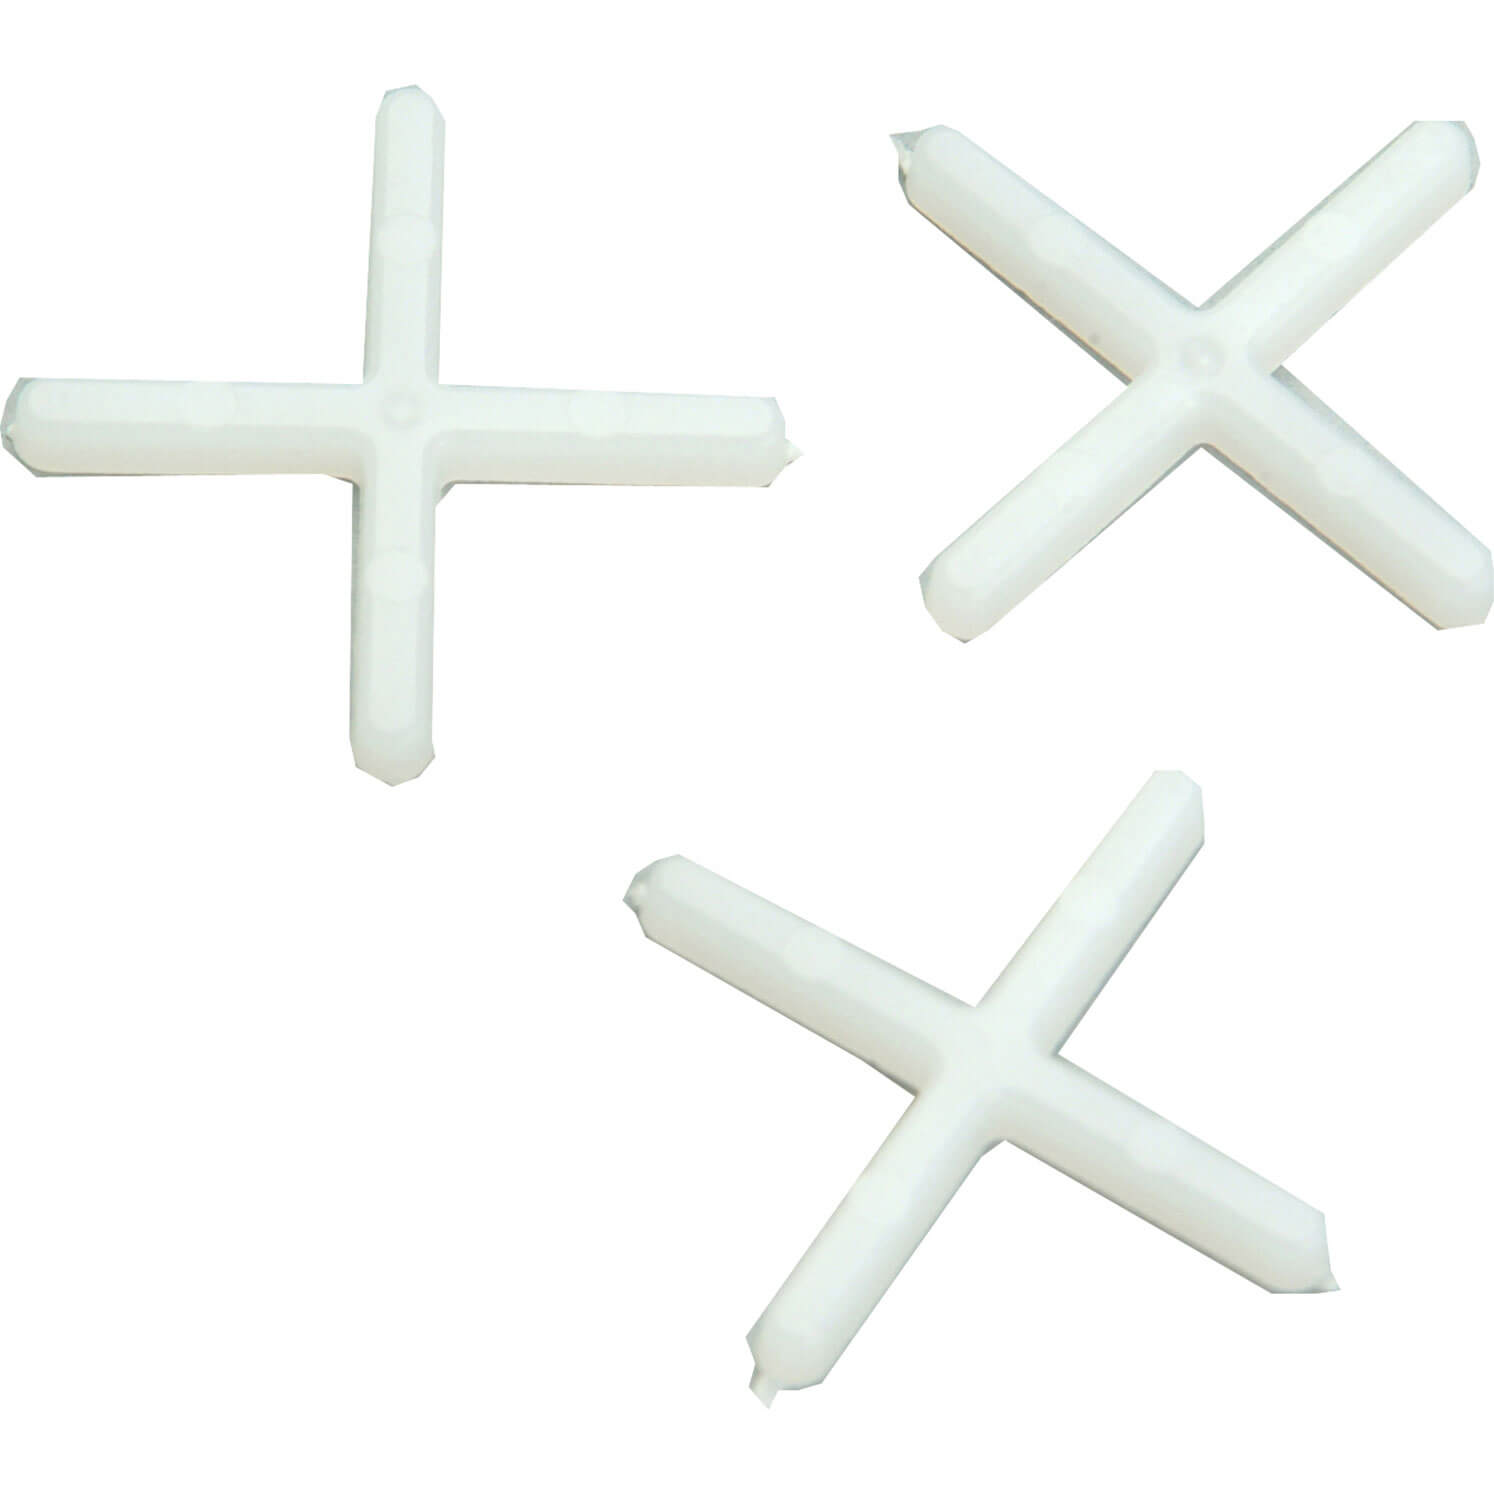 Image of Vitrex Plastic Wall Tile Spacers 1.5mm Pack of 5000